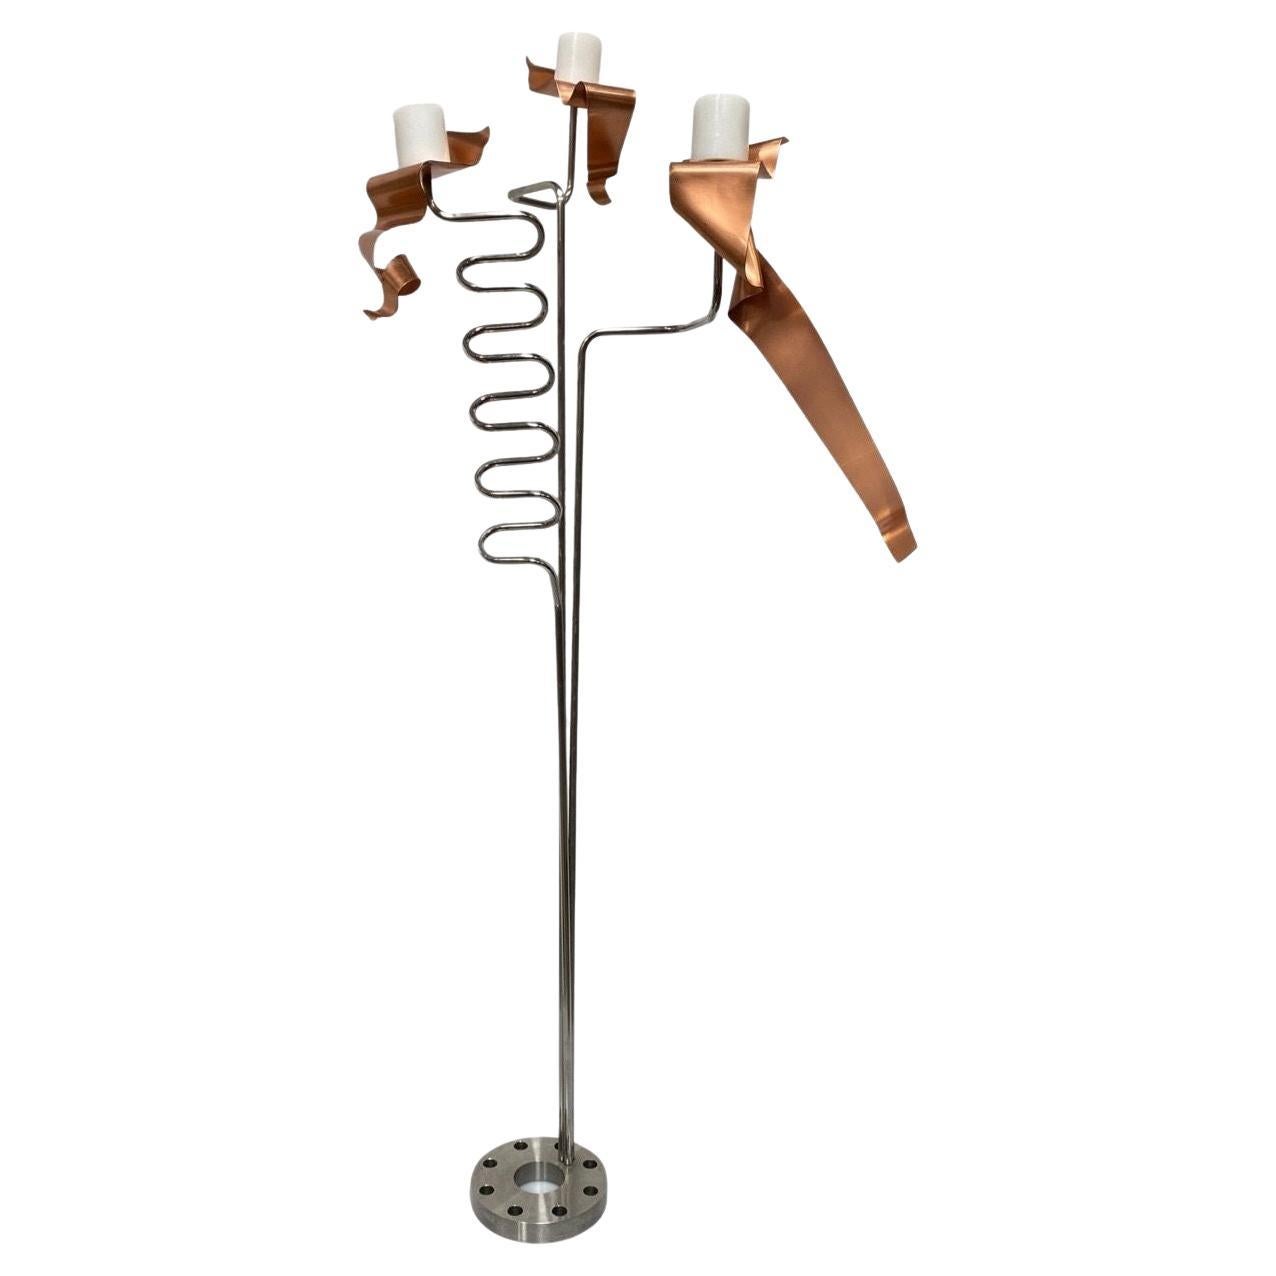 Machine Chrome & Copper 3 Arm Artist Signed Abstract Sculptural Candelabra For Sale